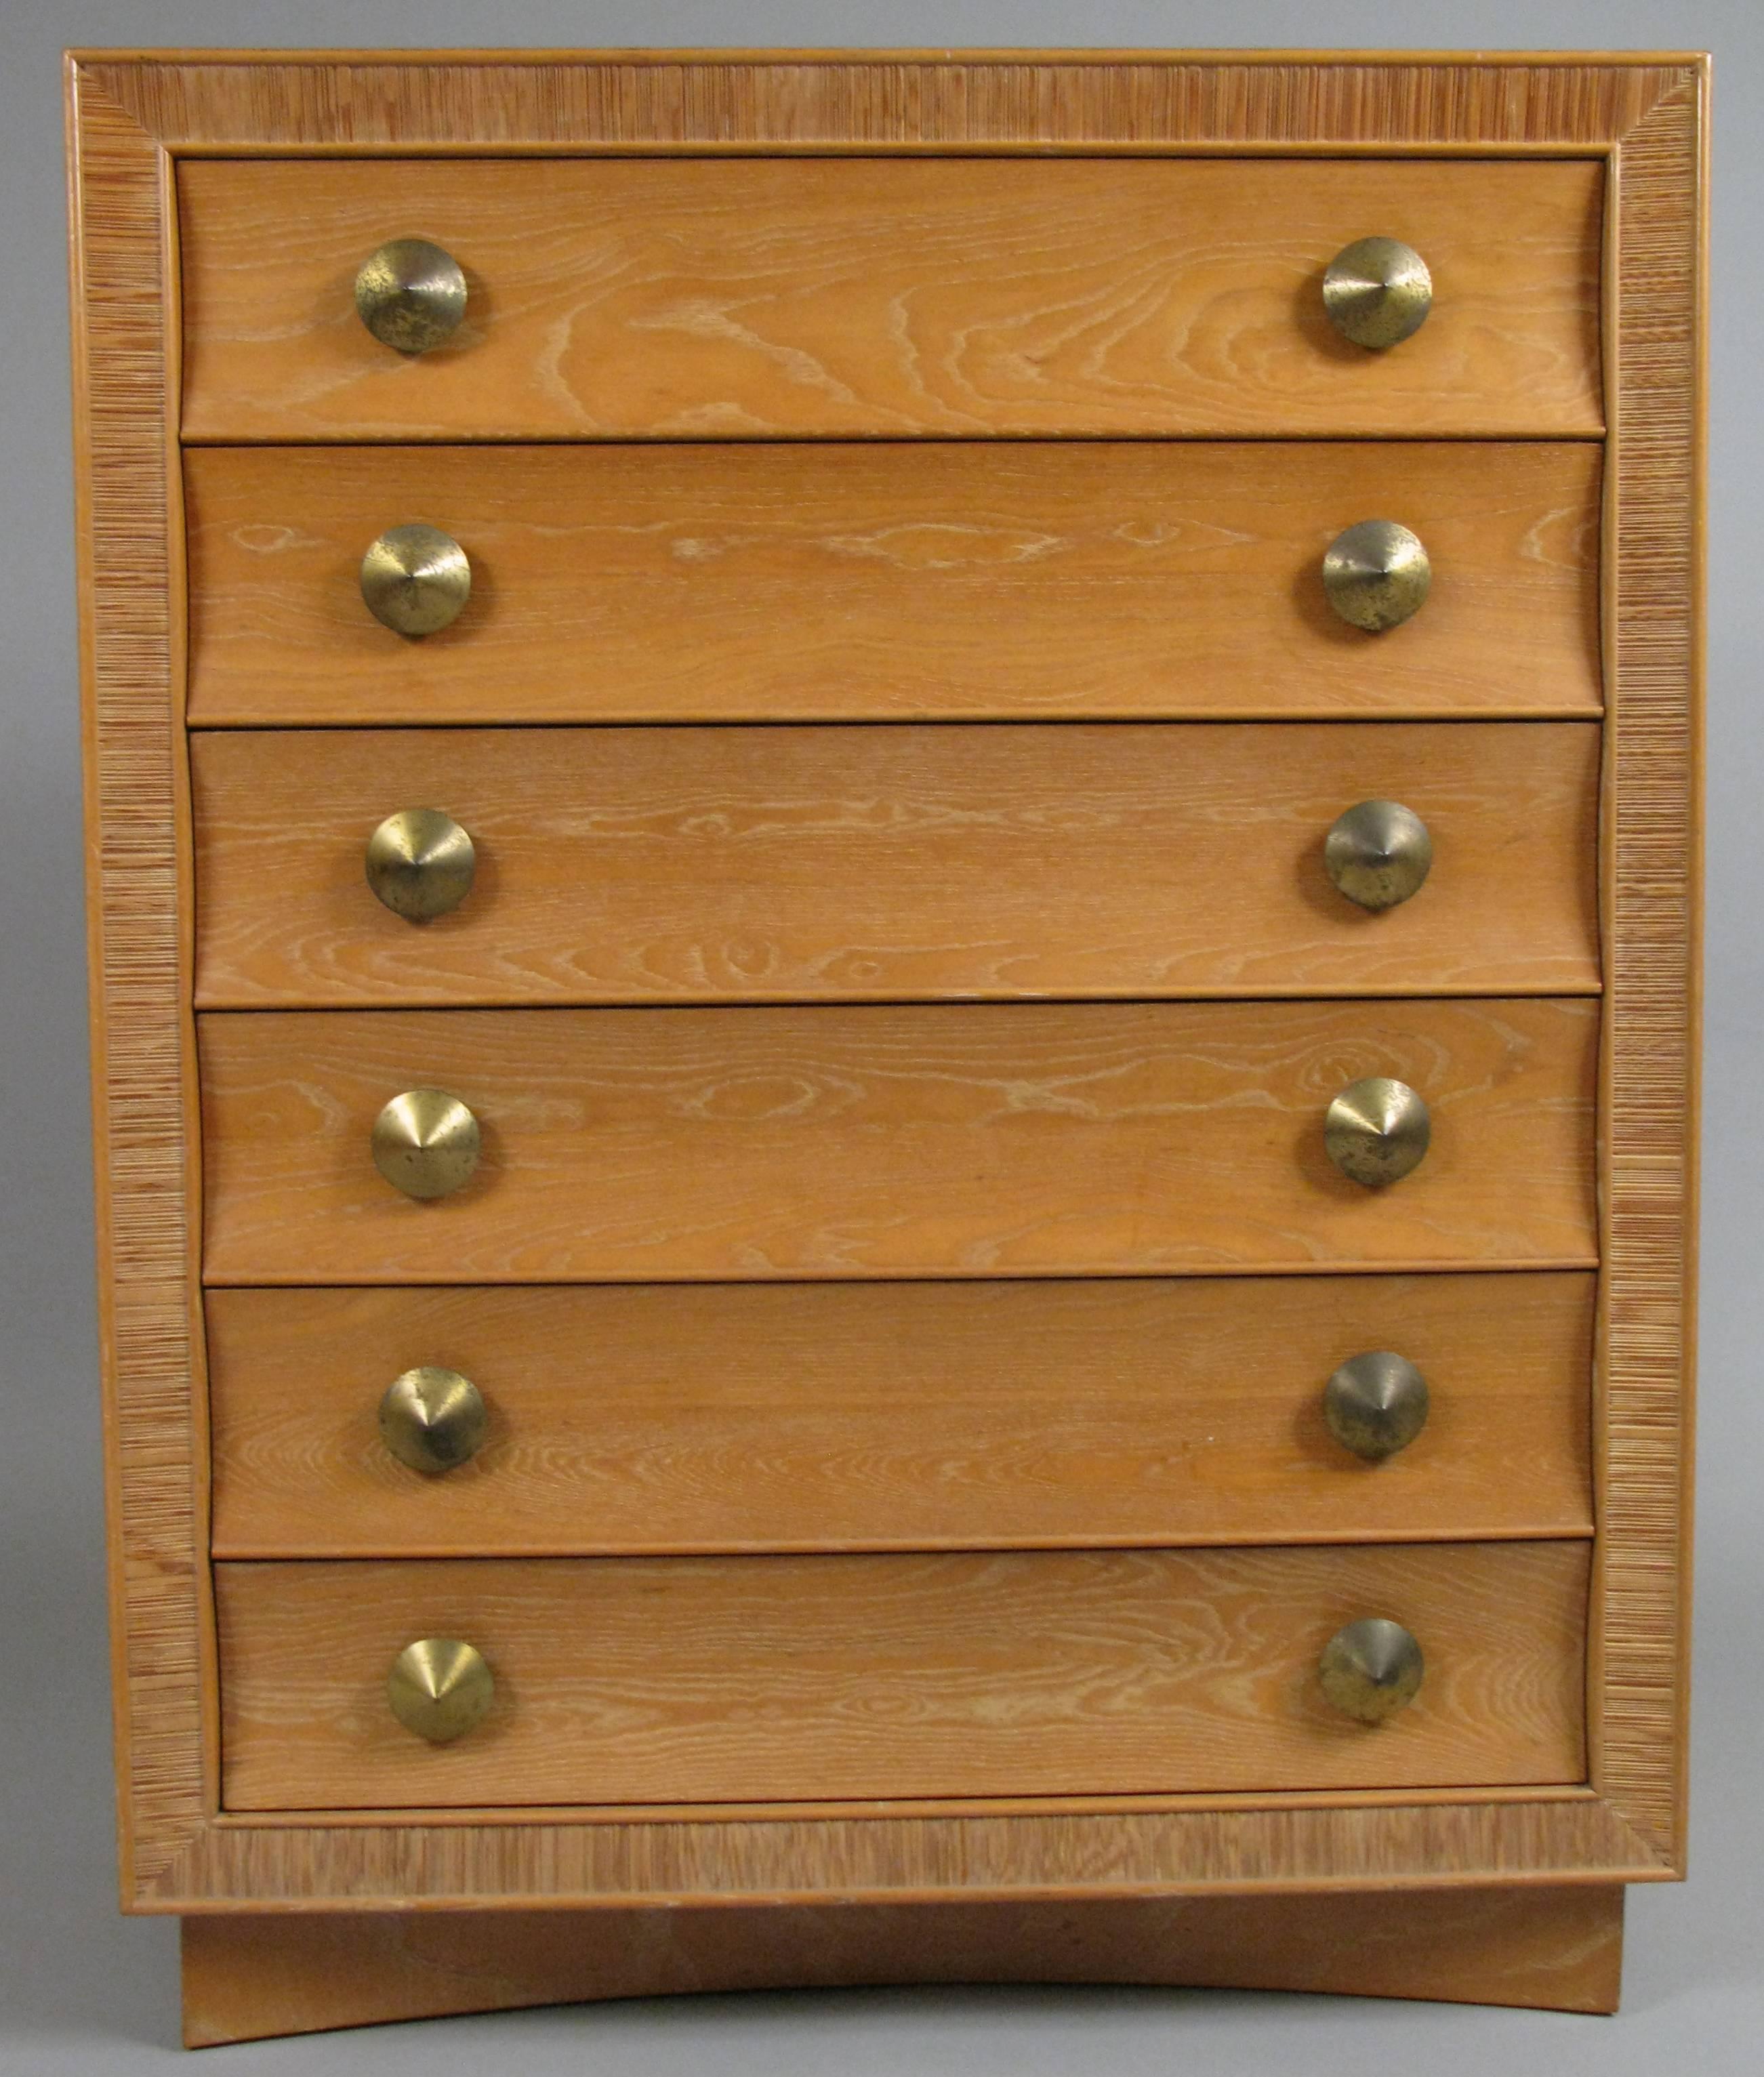 A very handsome vintage 1940s natural oak six-drawer chest with beautiful concave curved drawer fronts, a combed oak border, and the original conical brass hardware. Classic design and very nice original finish. Designed by Paul Frankl and made by